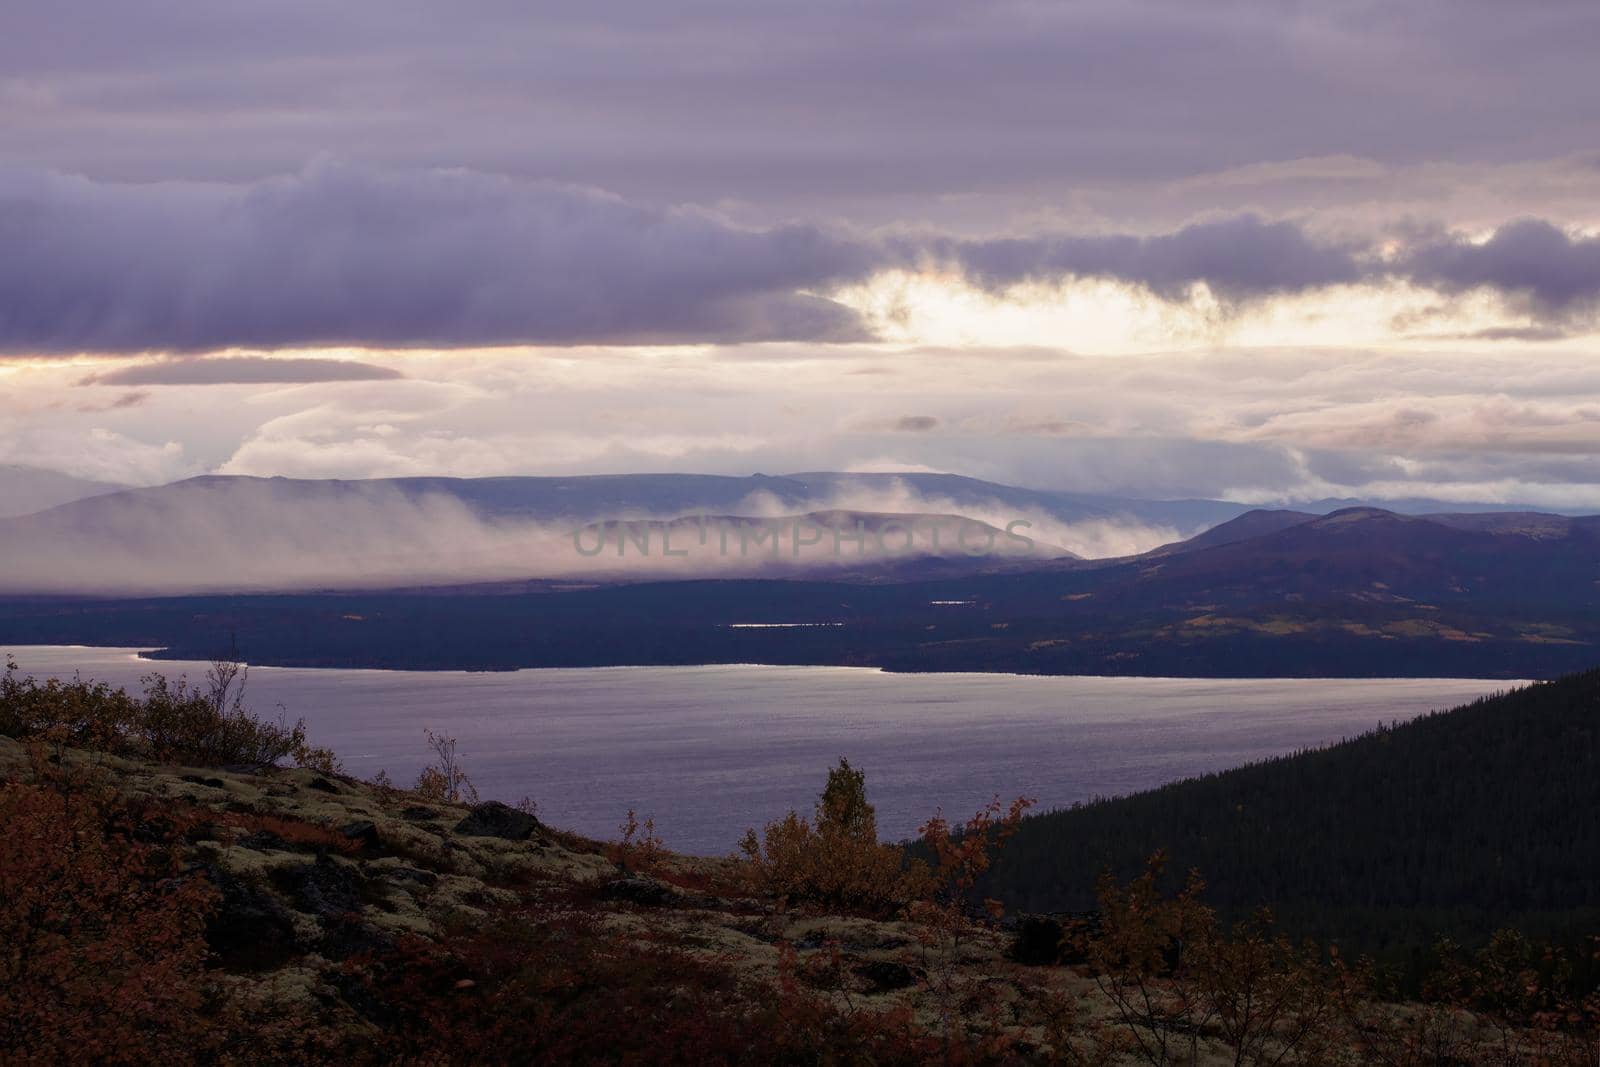 North Russia Khibiny mountains in autumn mountain lake and forest. Murmansk region. by Andre1ns